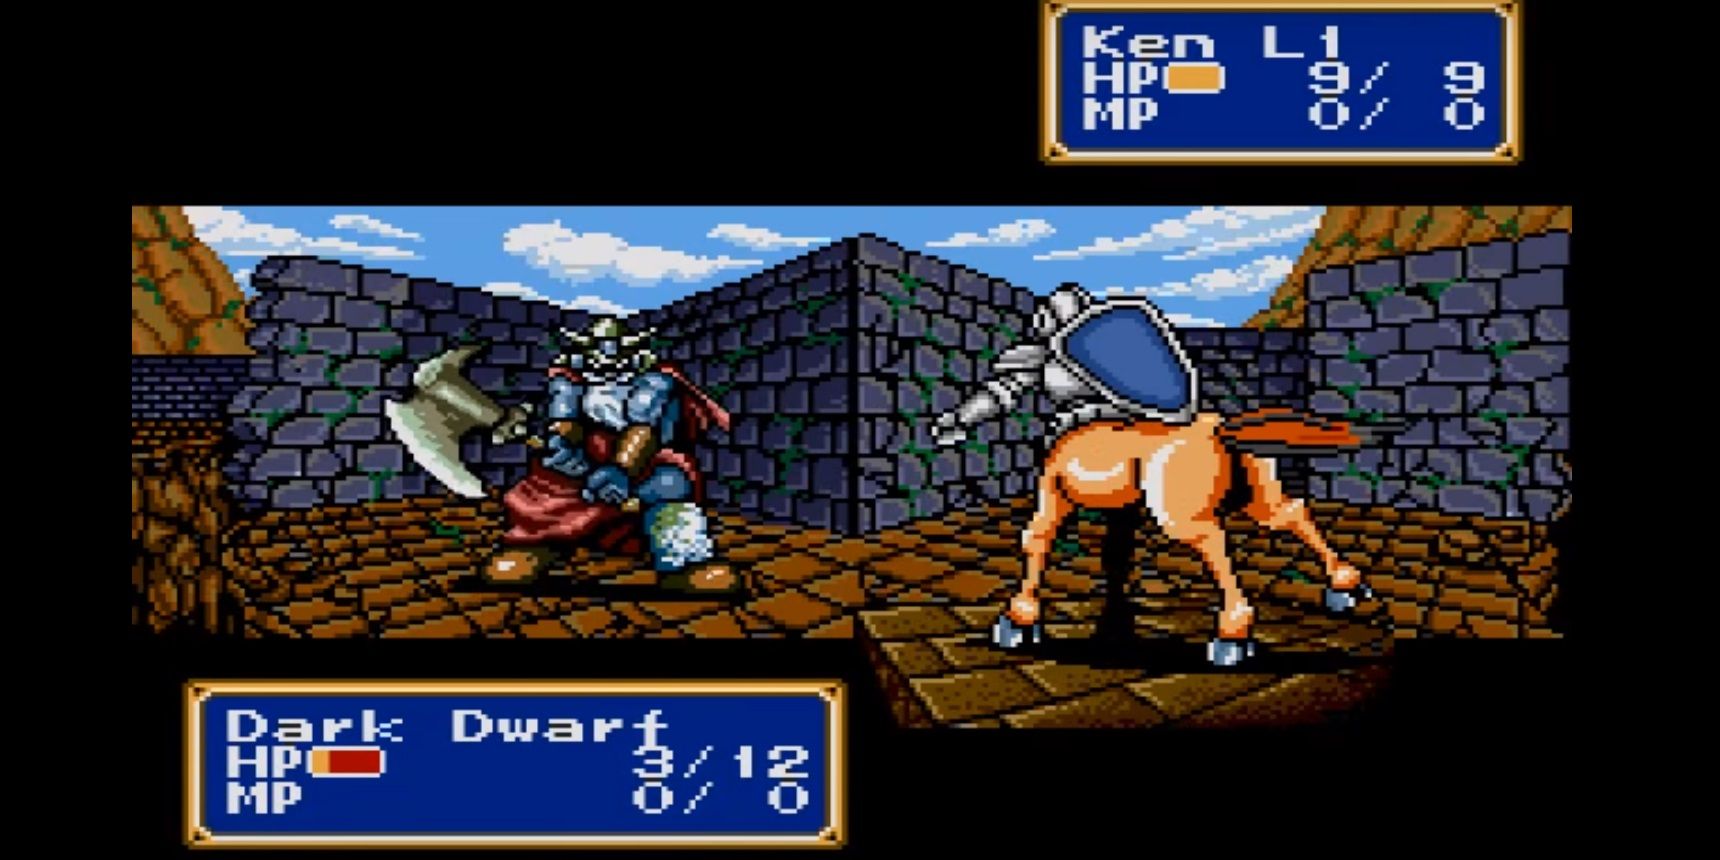 A combat scene in Sega's Shining Force with a knight fighting an enemy